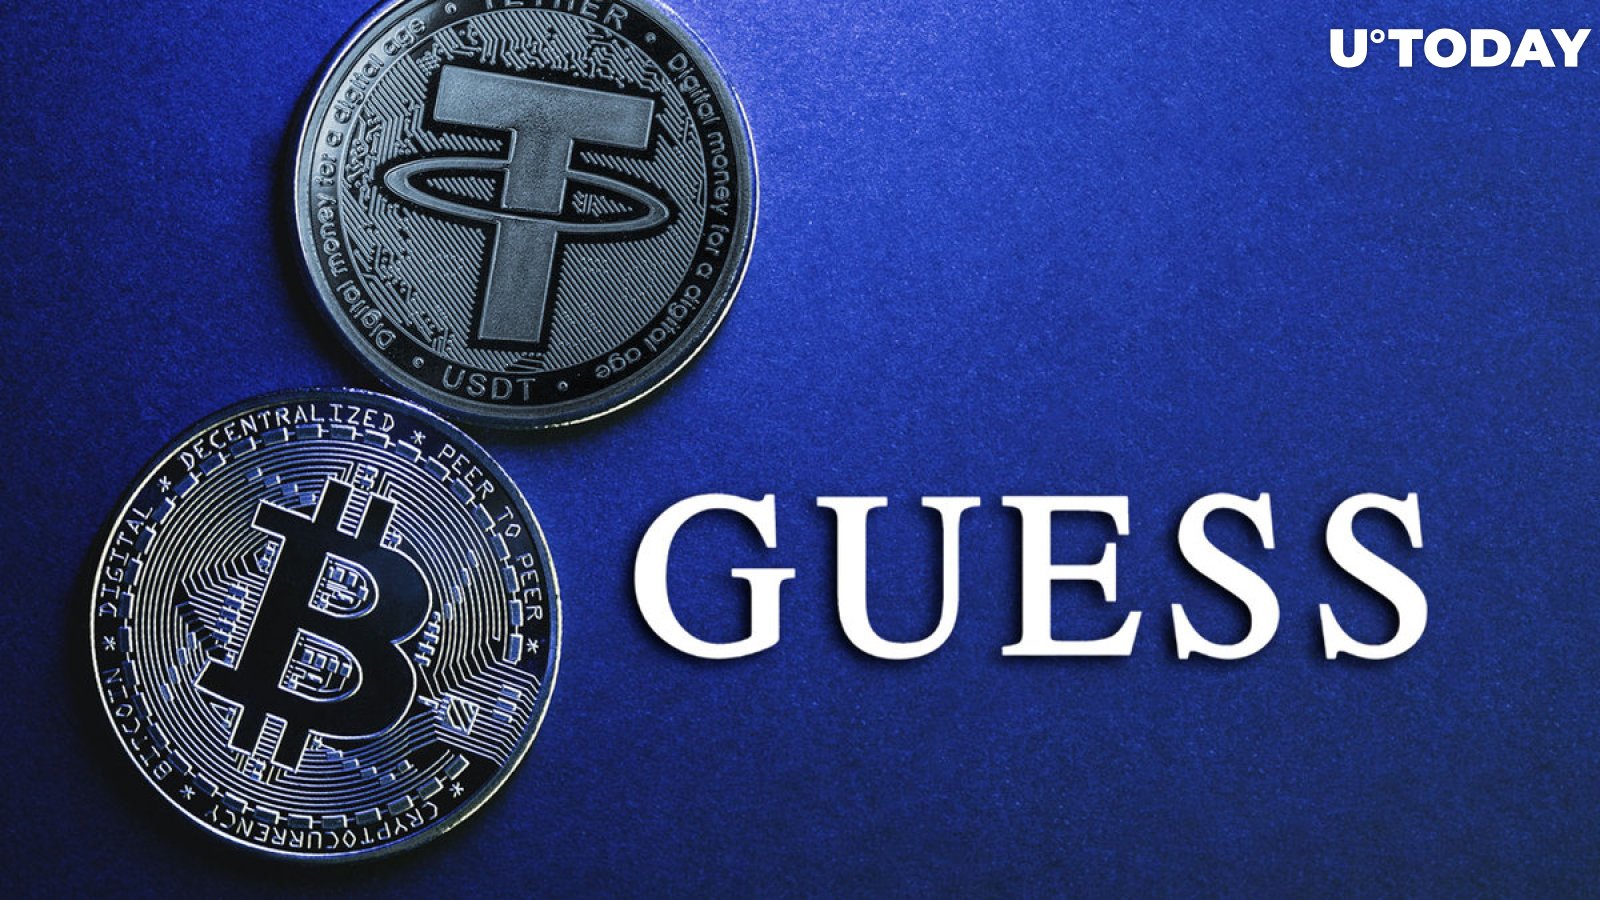 Fashion Brand Guess Now Accepts Bitcoin (BTC), Tether (USDT) in Lugano